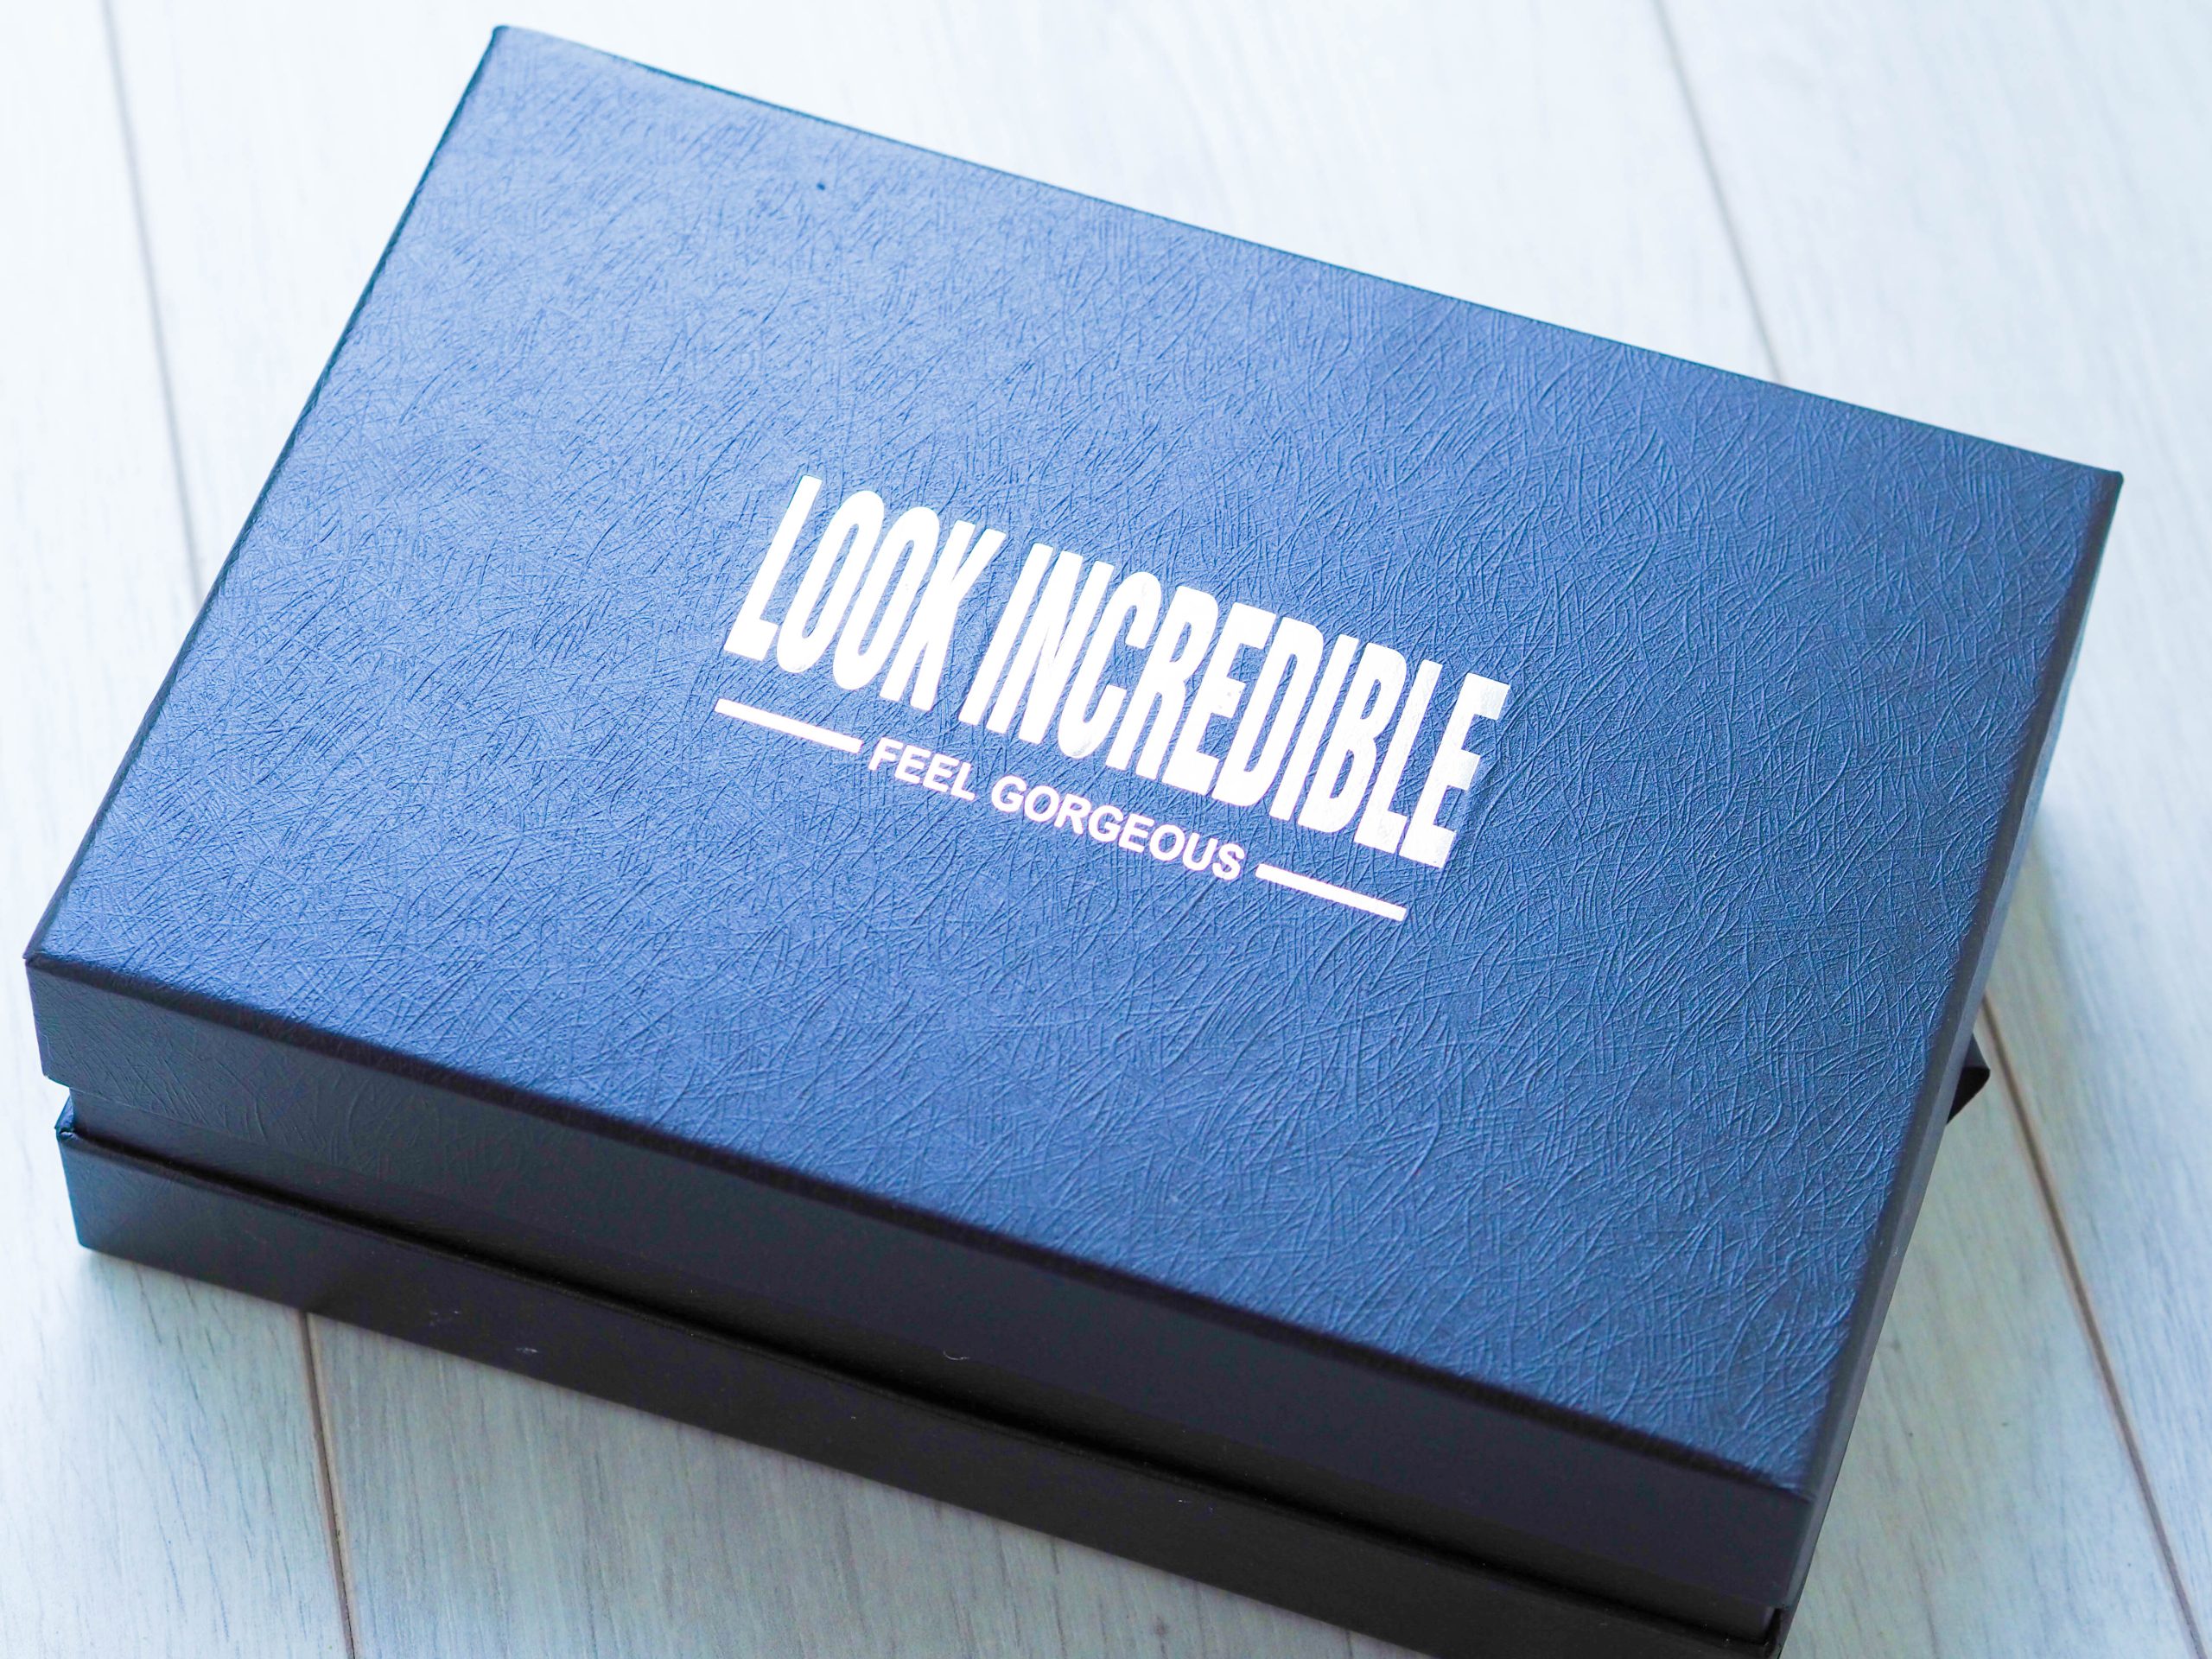 Look Incredible September 2019 Deluxe Edition Box